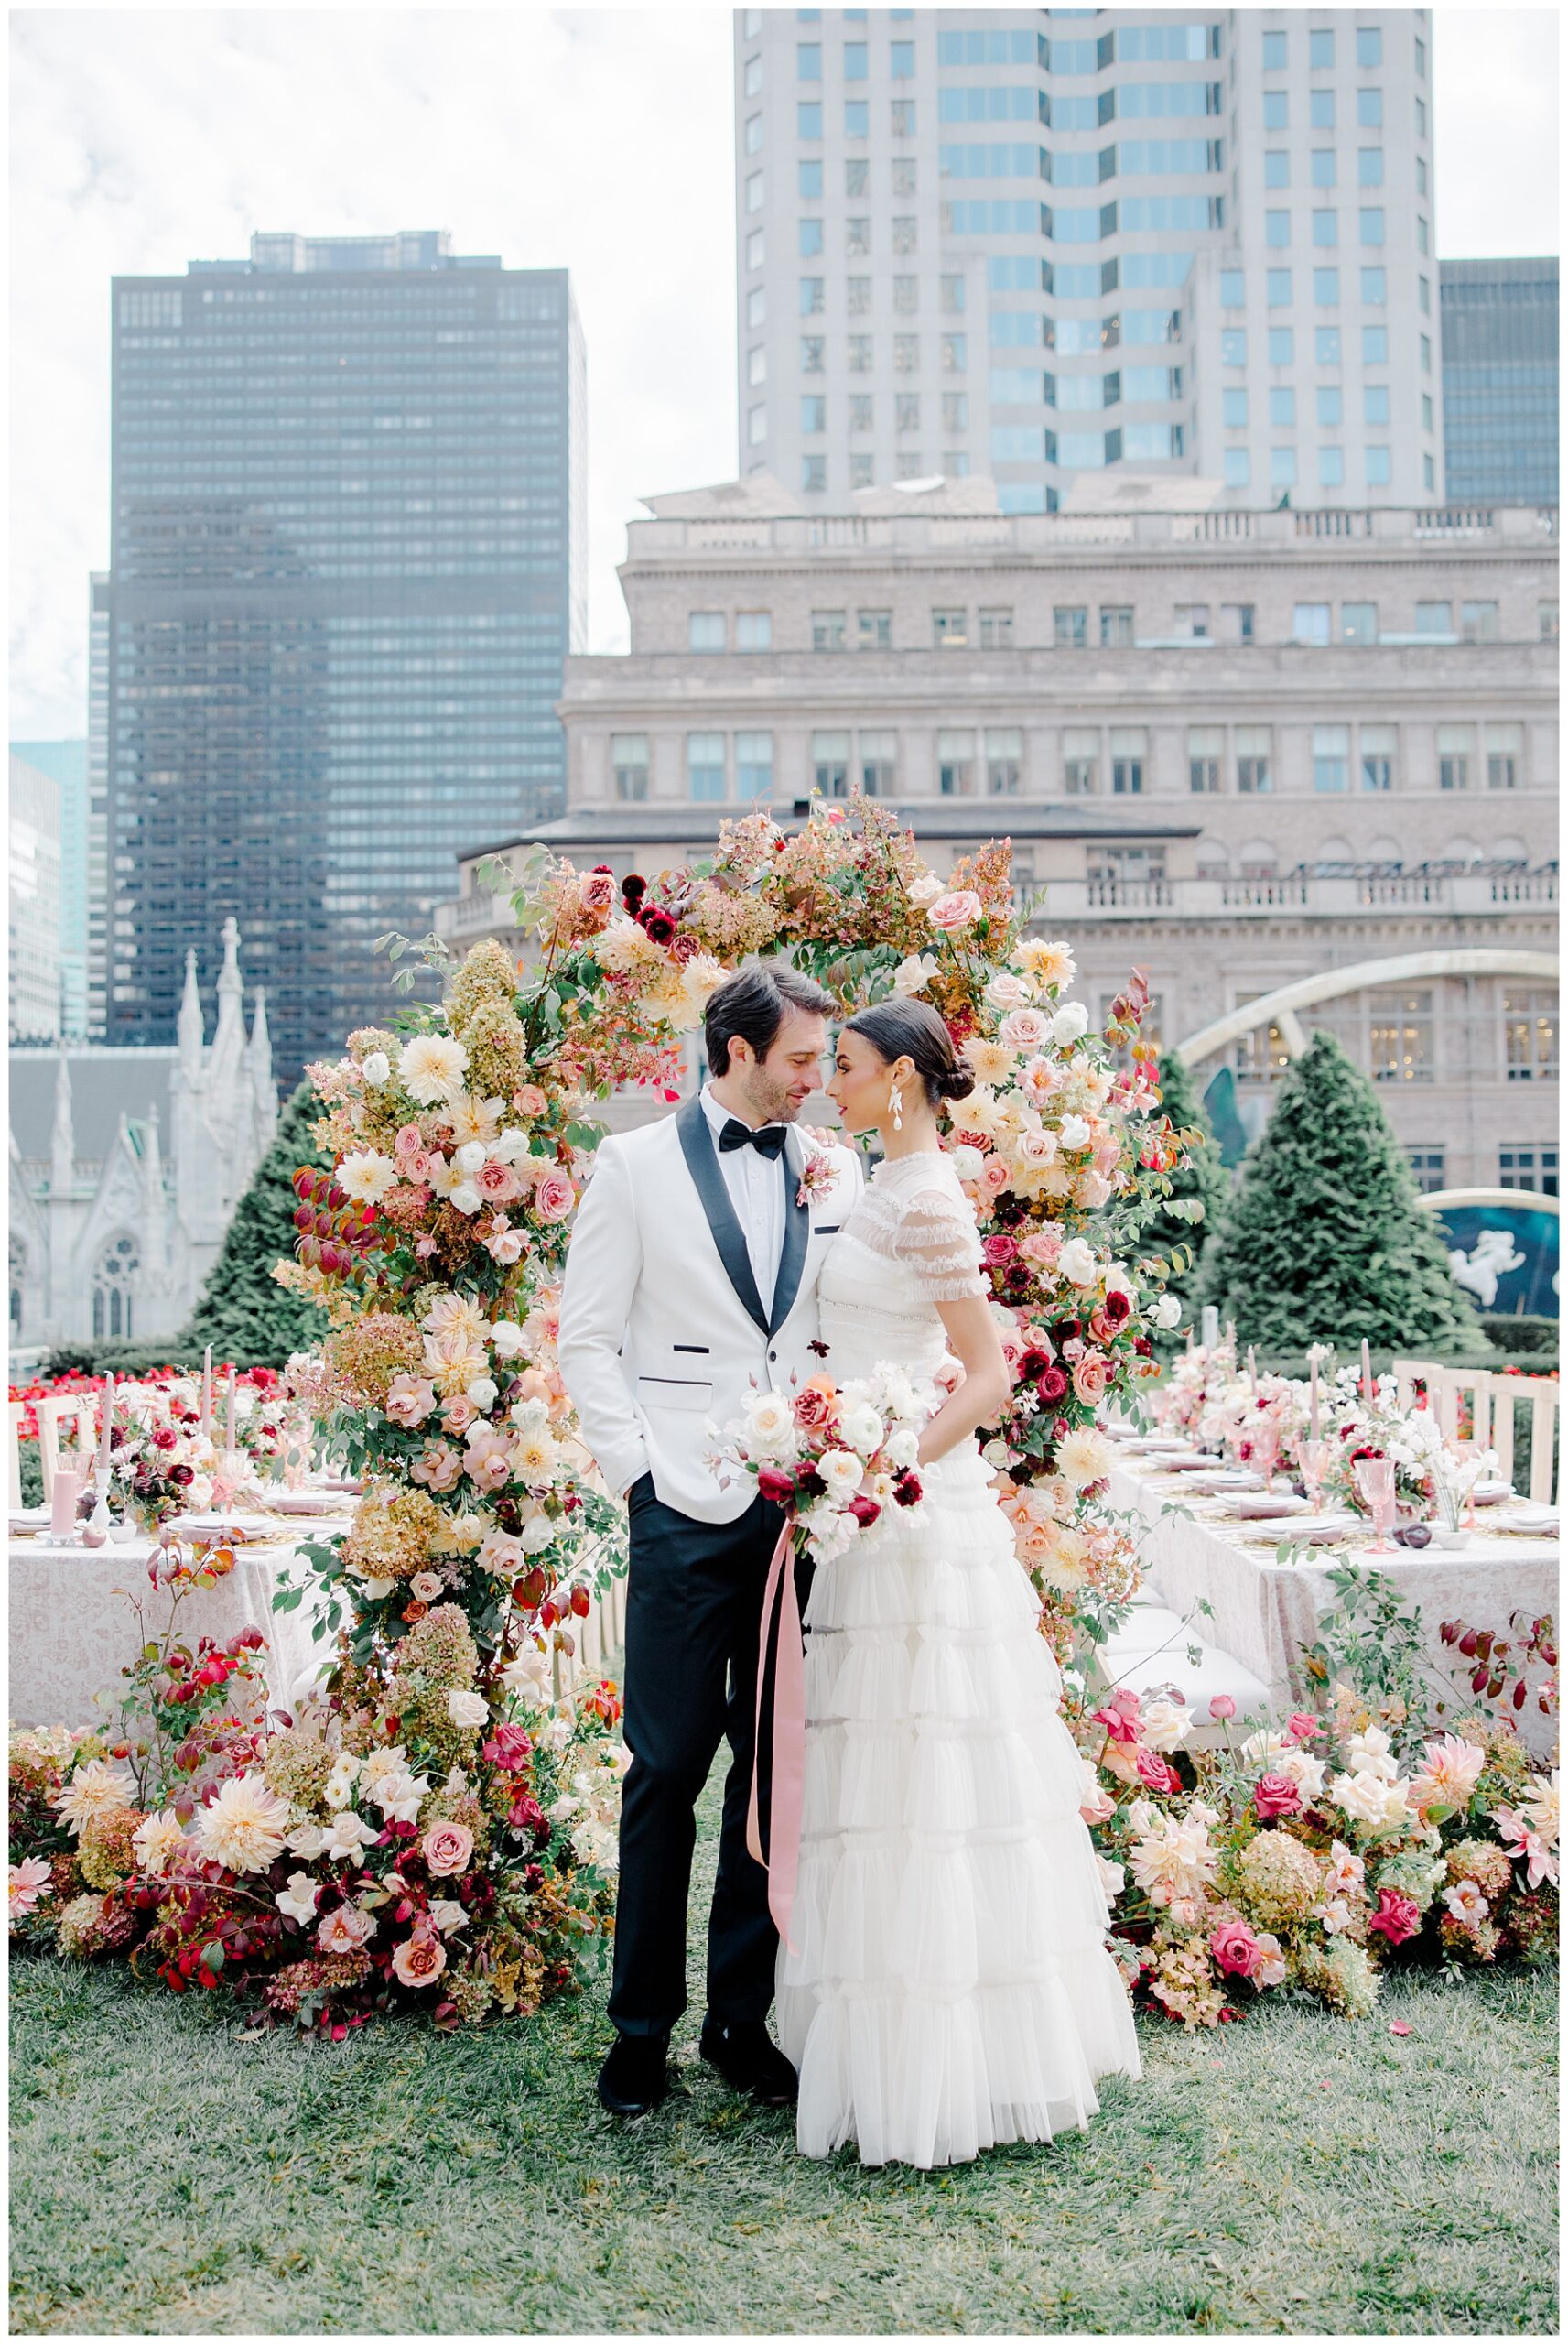 Newlyweds in front of floral arch at rooftop wedding reception